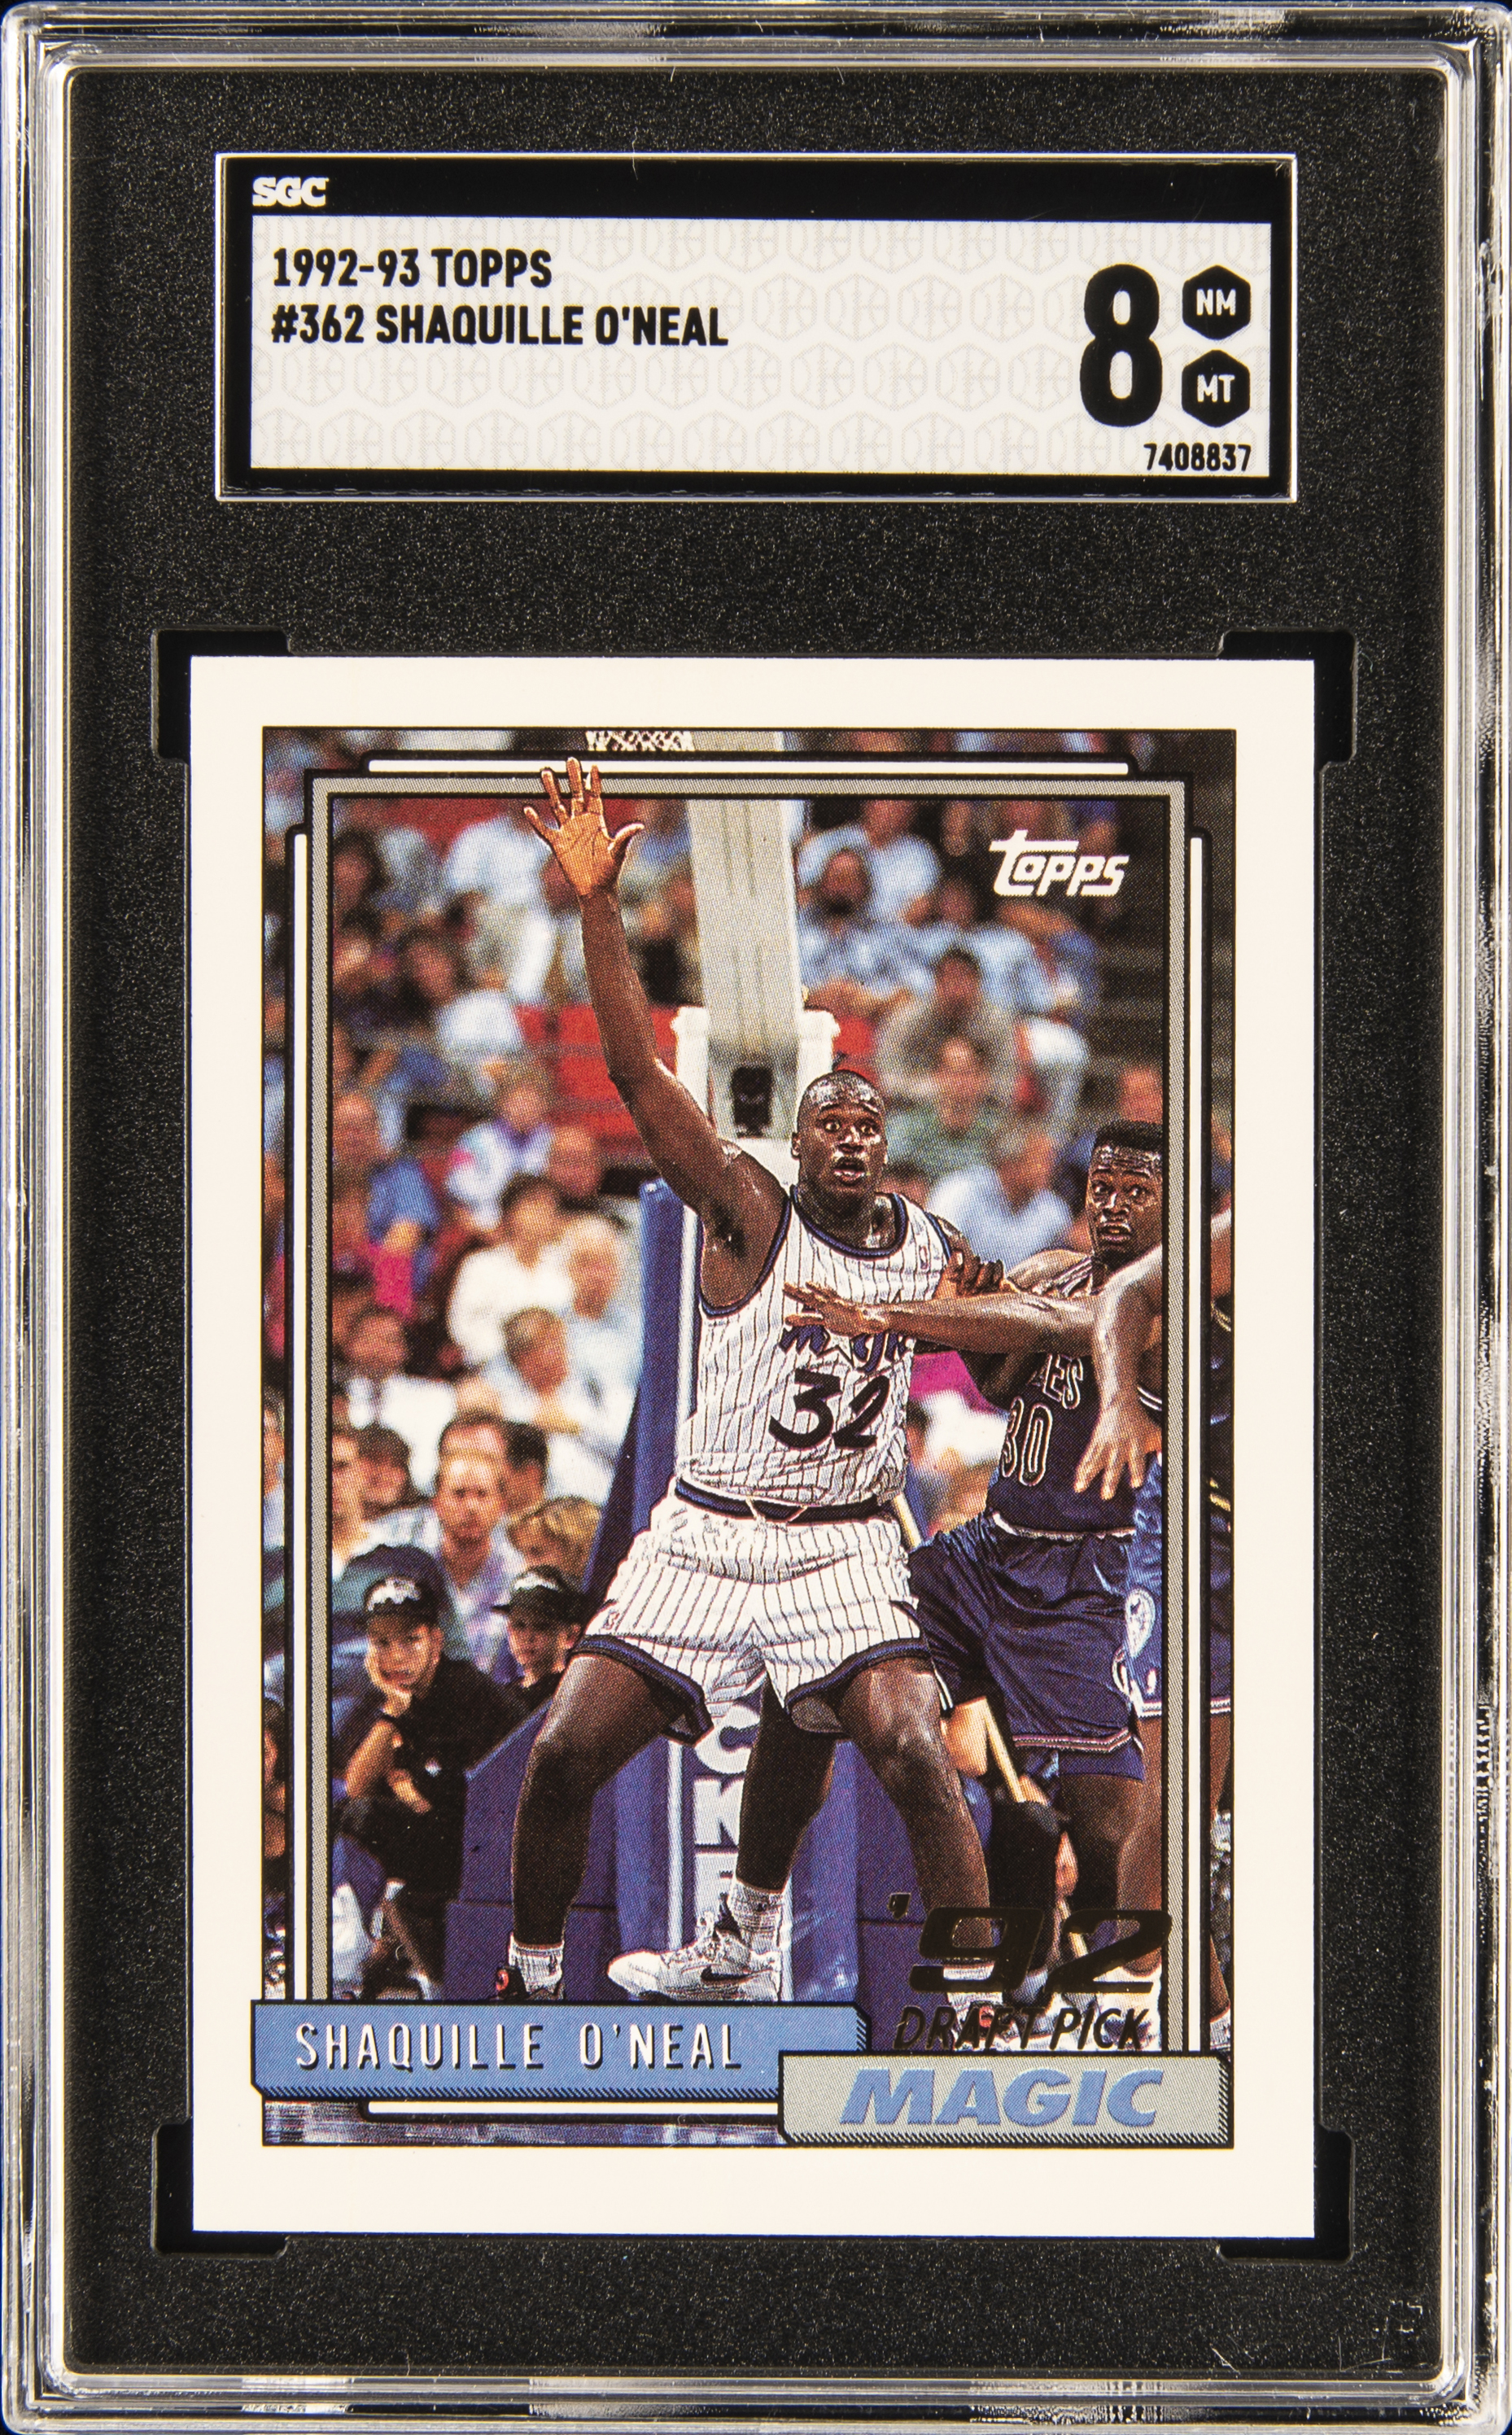 1992-93 Topps #362 Shaquille O'Neal Rookie Card – BGS NM-MT 8